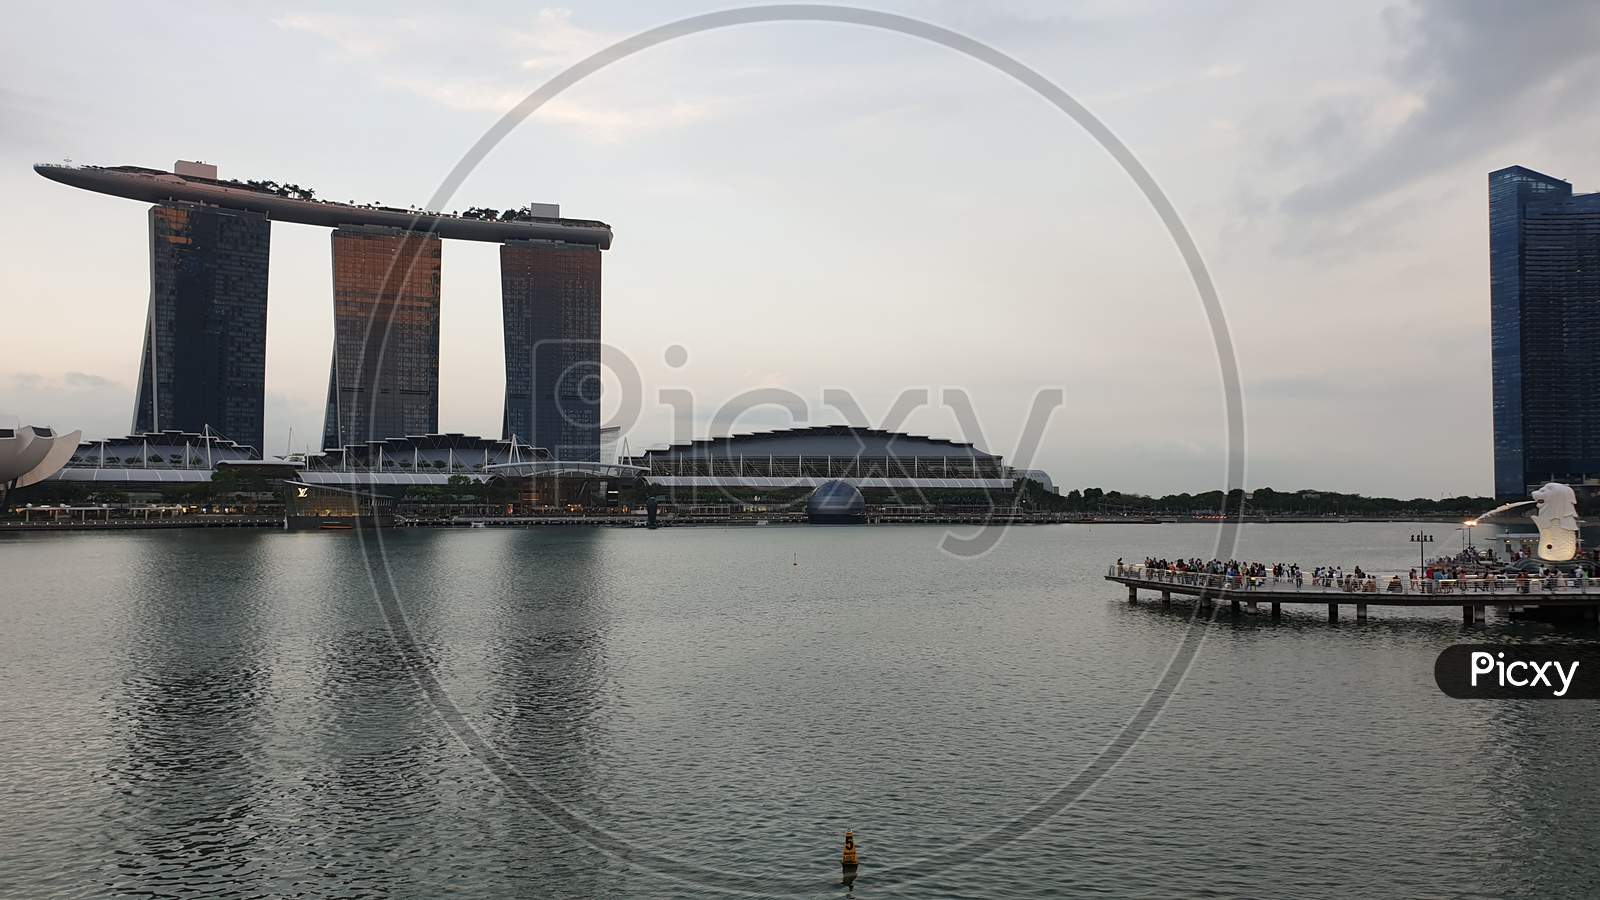 The Marina Bay With Sea Lion Statue